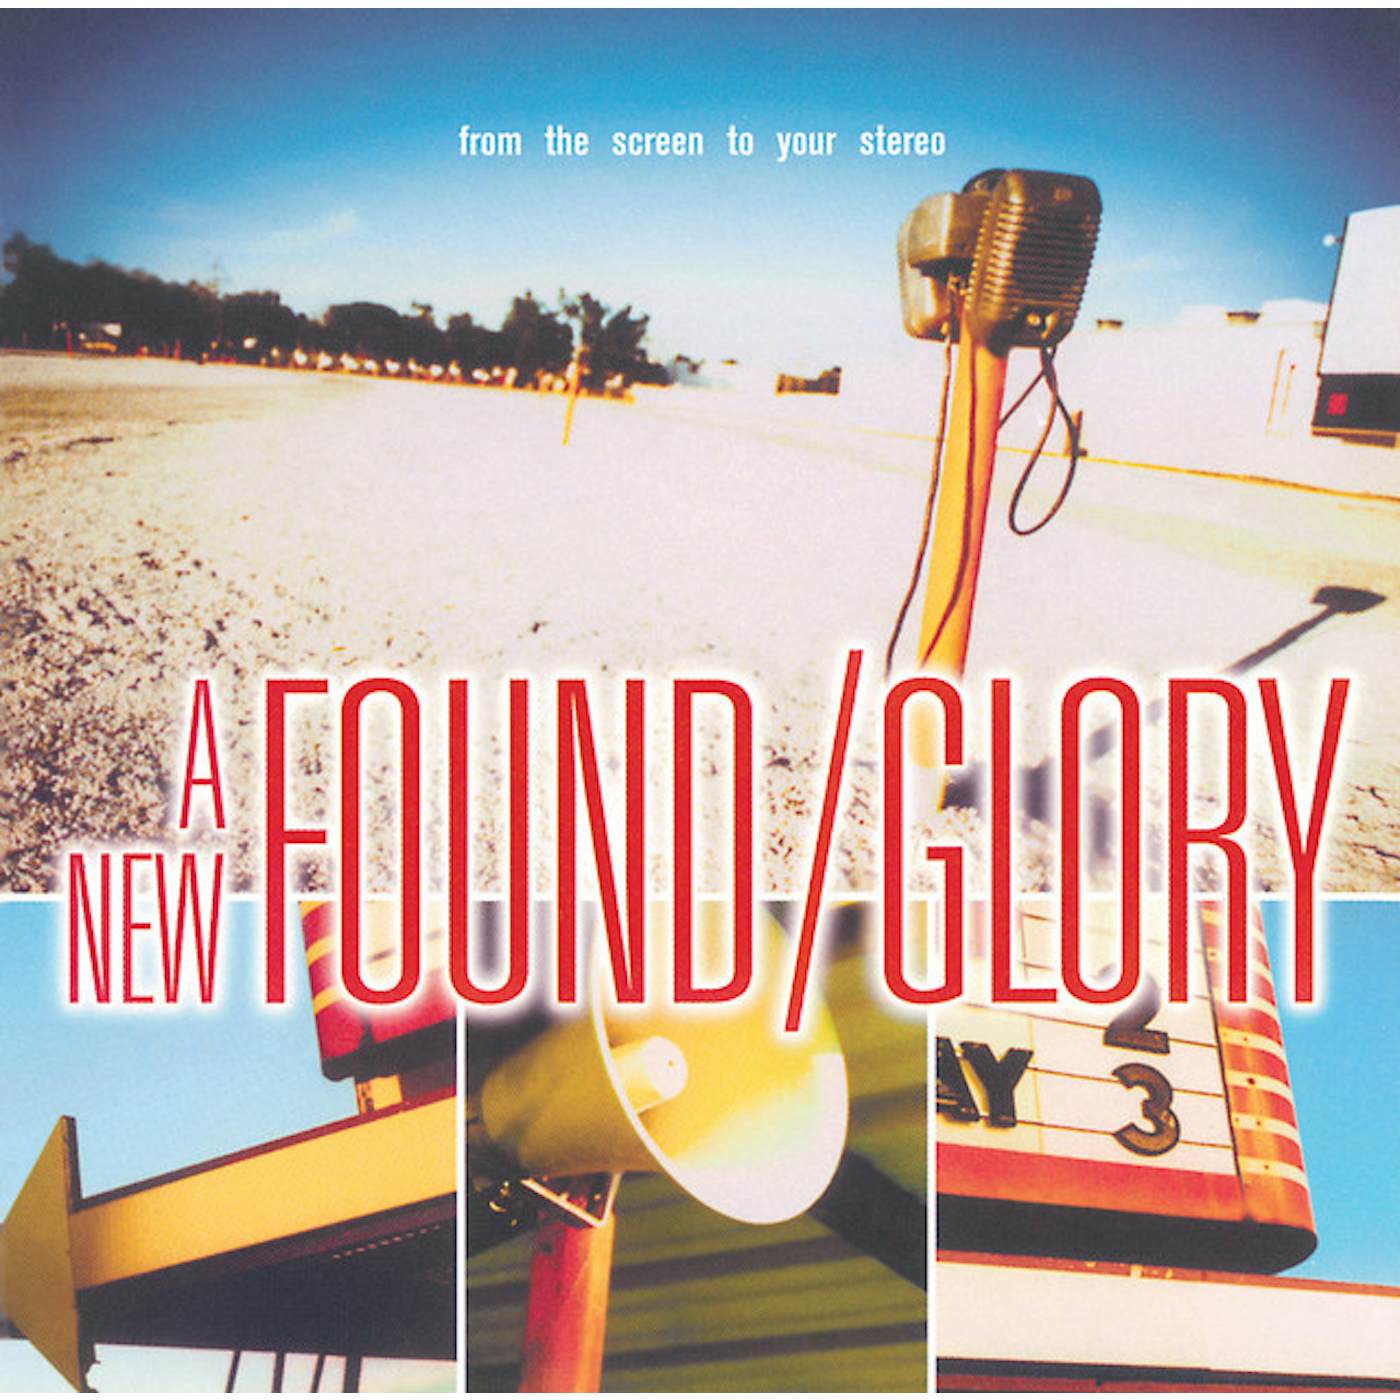 New Found Glory FROM THE SCREEN TO YOUR STEREO 3 Vinyl Record